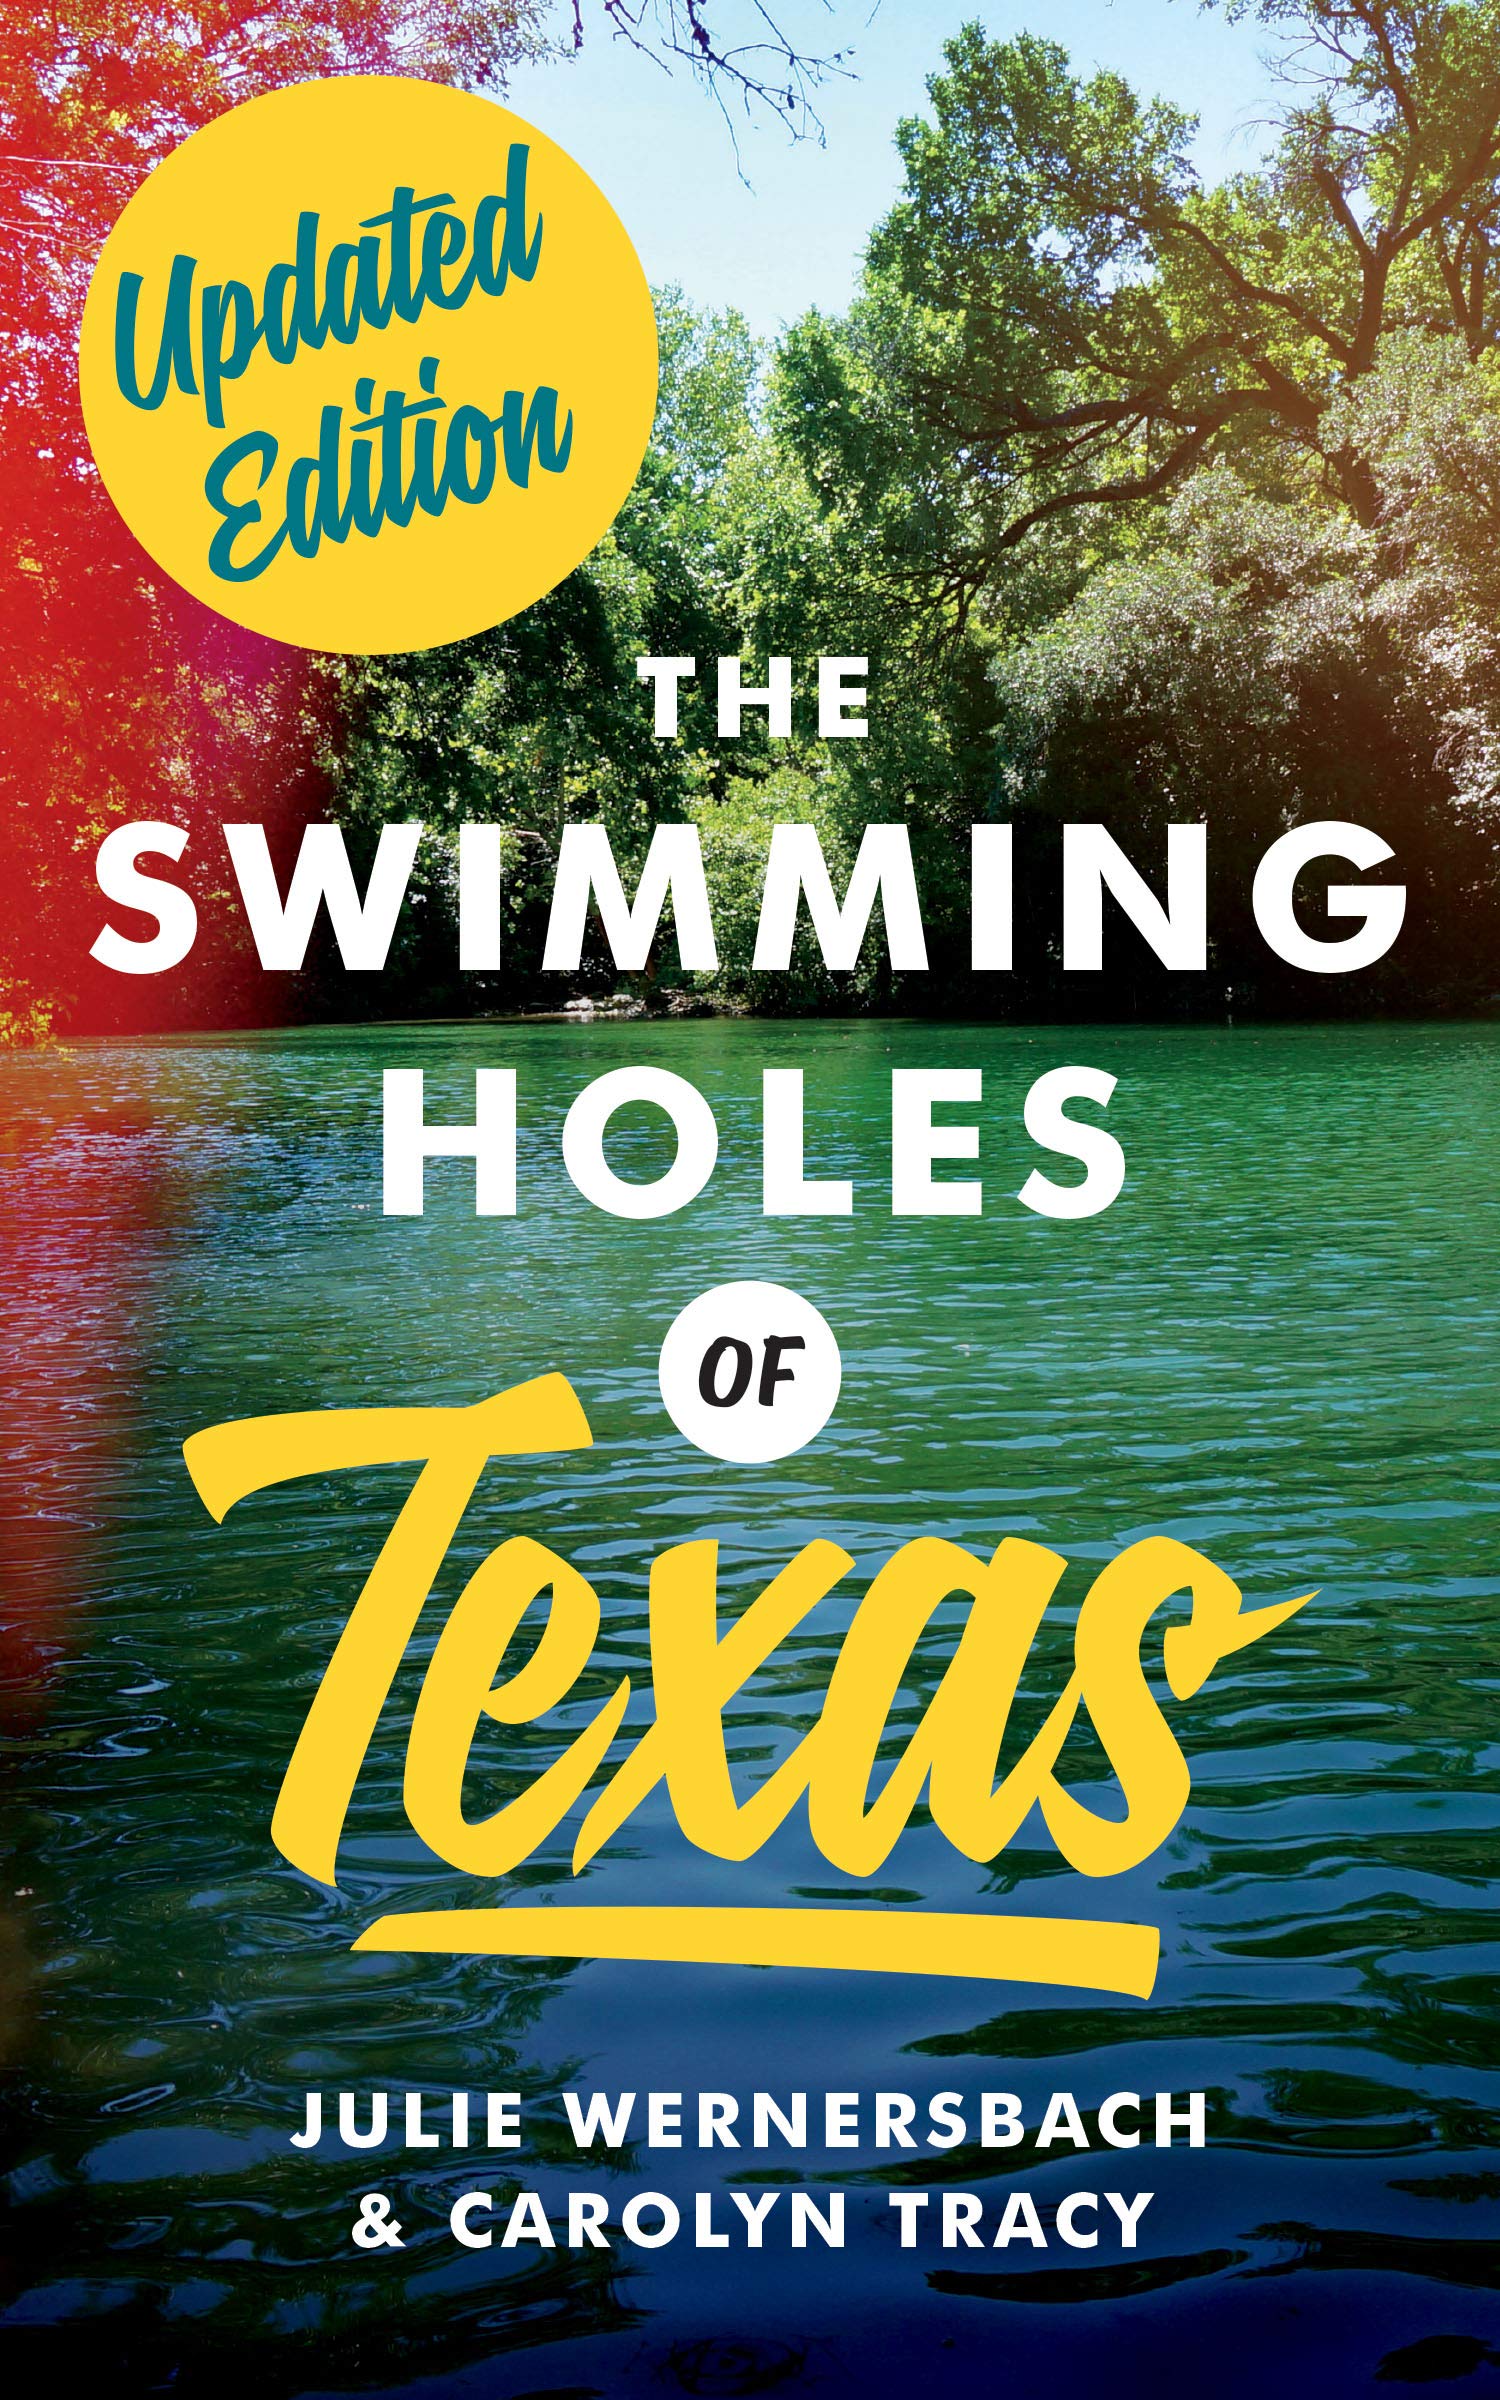 The Swimming Holes of Texas | Julie Wernersbach, Carolyn Tracy